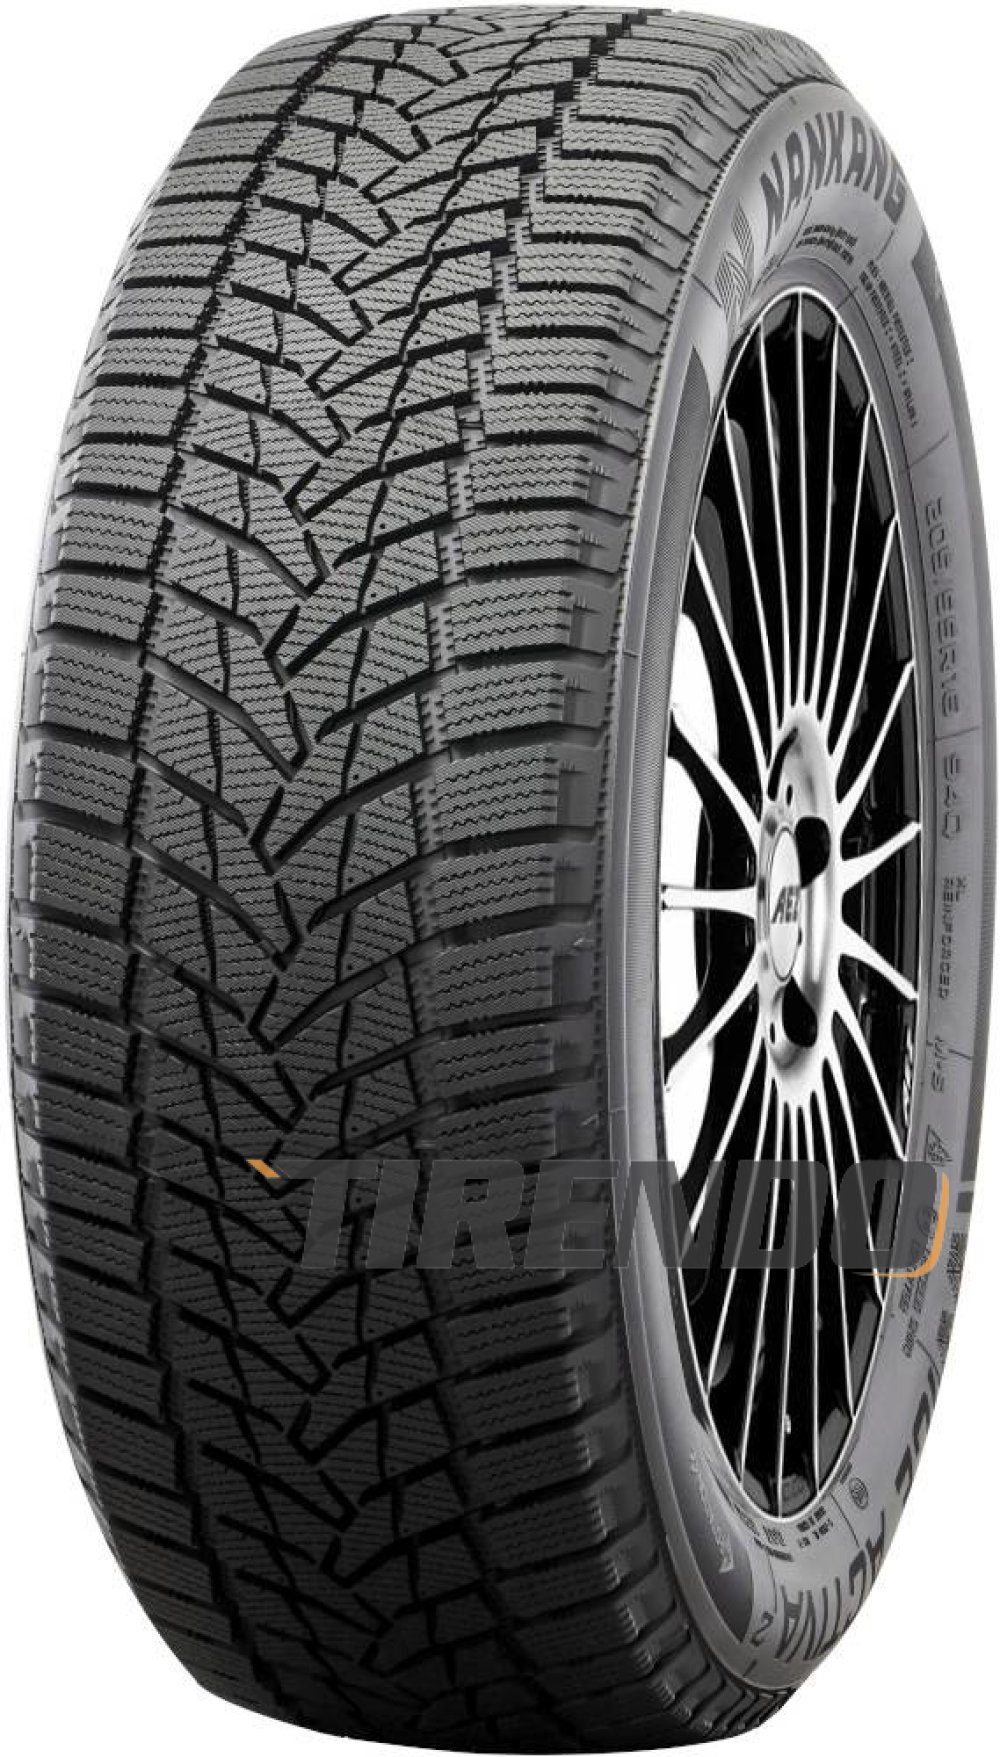 Image of Nankang ICE ACTIVA 2 ( 215/65 R17 103T XL, Nordic compound )